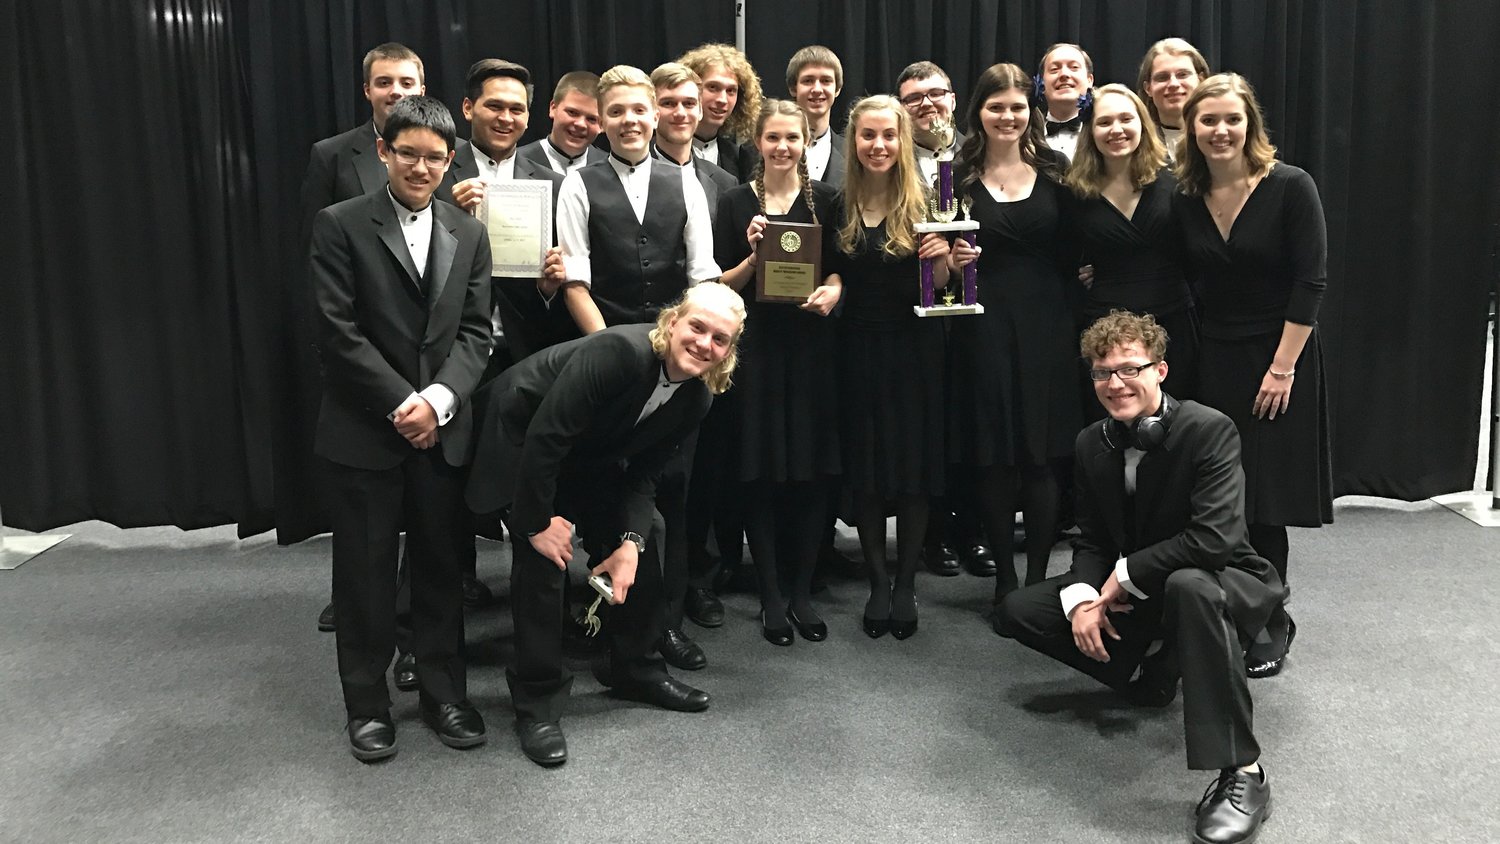 Hockinson Jazz pose for a picture with their awards at University of Portland Jazz Festival.